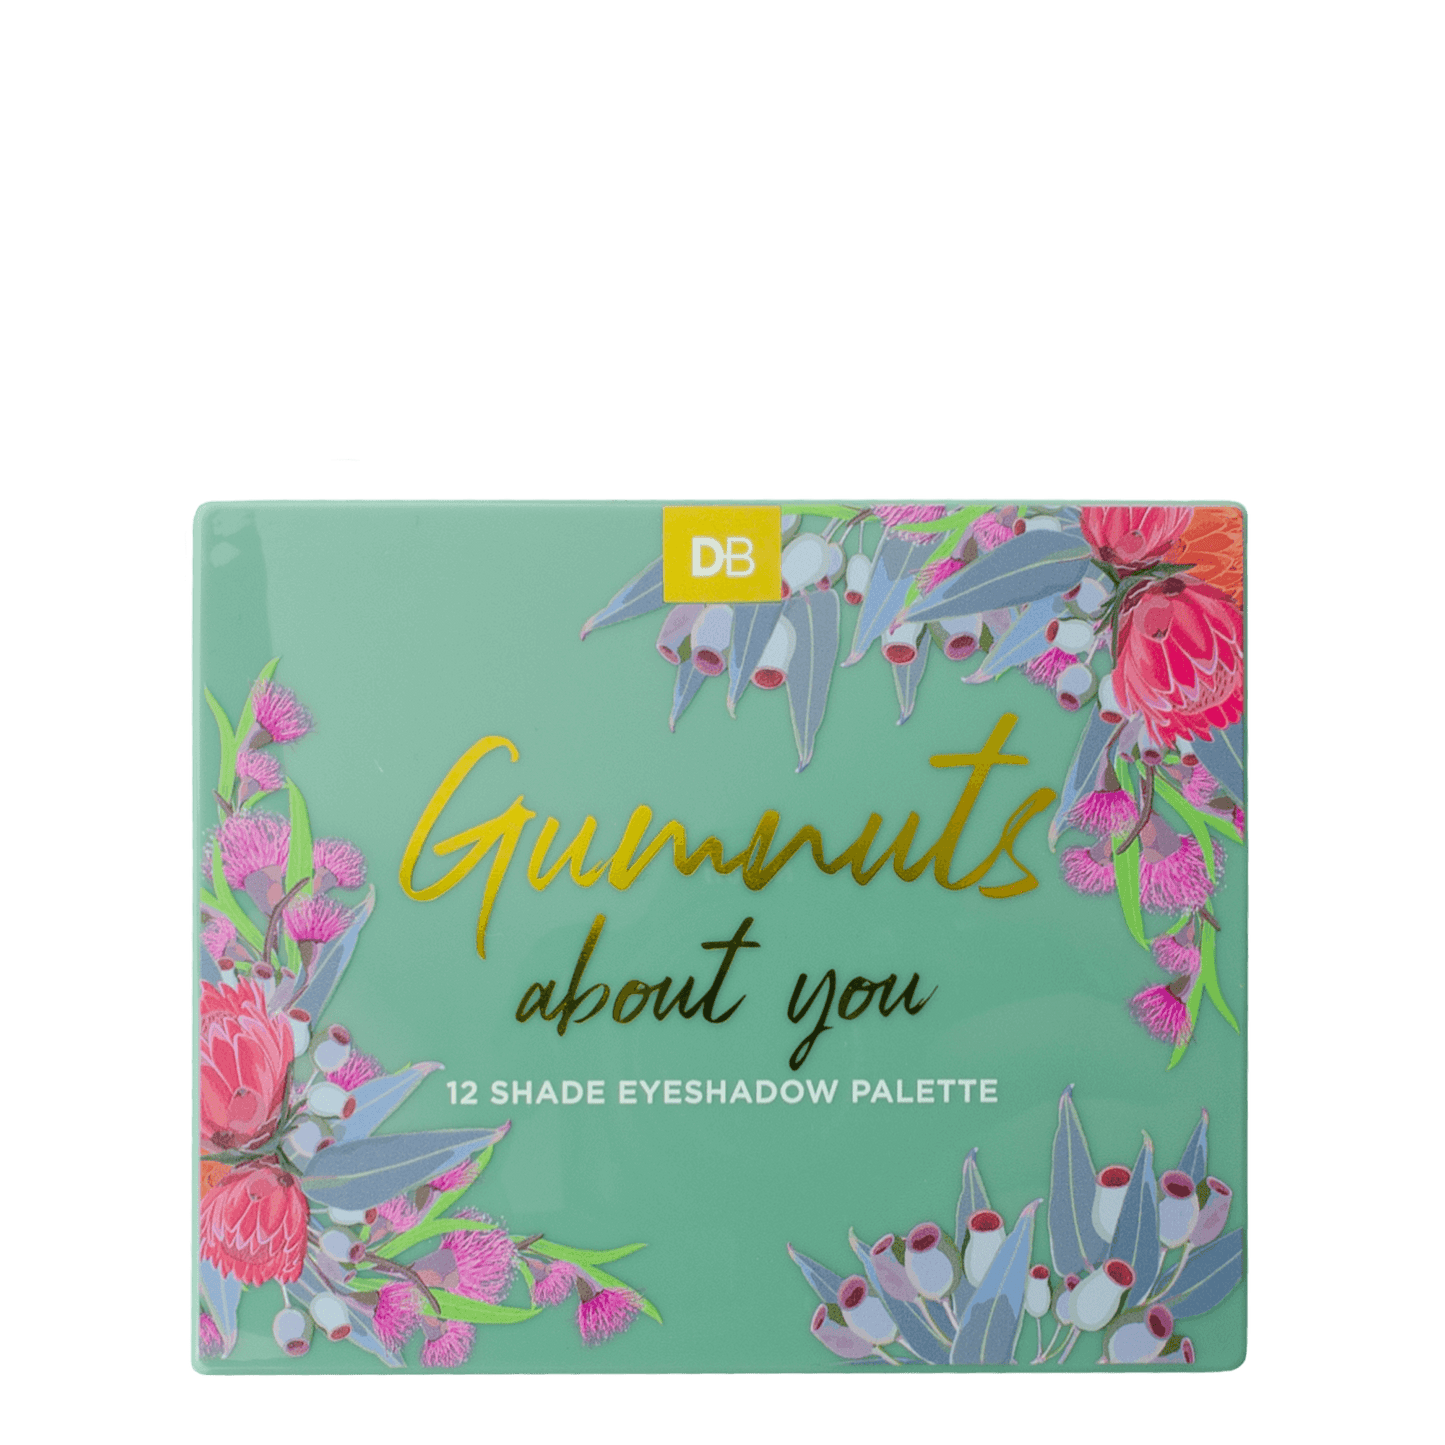 Gumnuts About You 12 Shade Eyeshadow Palette | DB Cosmetics | 01